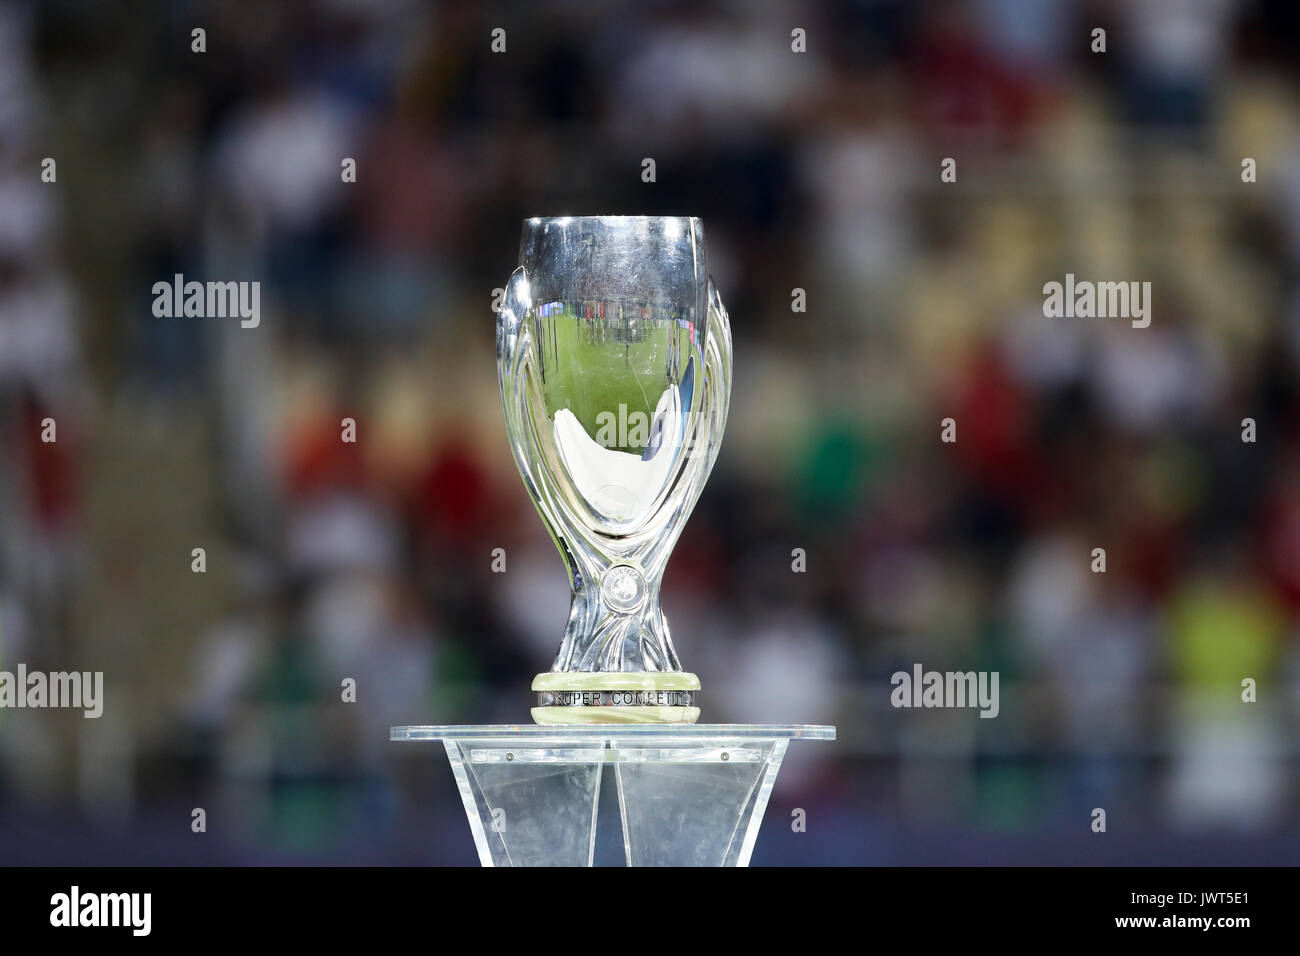 Skopje, FYROM - August 8,2017: Real Madrid celebrate with the trophy after defeating Manchester United 2-1 during the Super Cup final soccer match at  Stock Photo